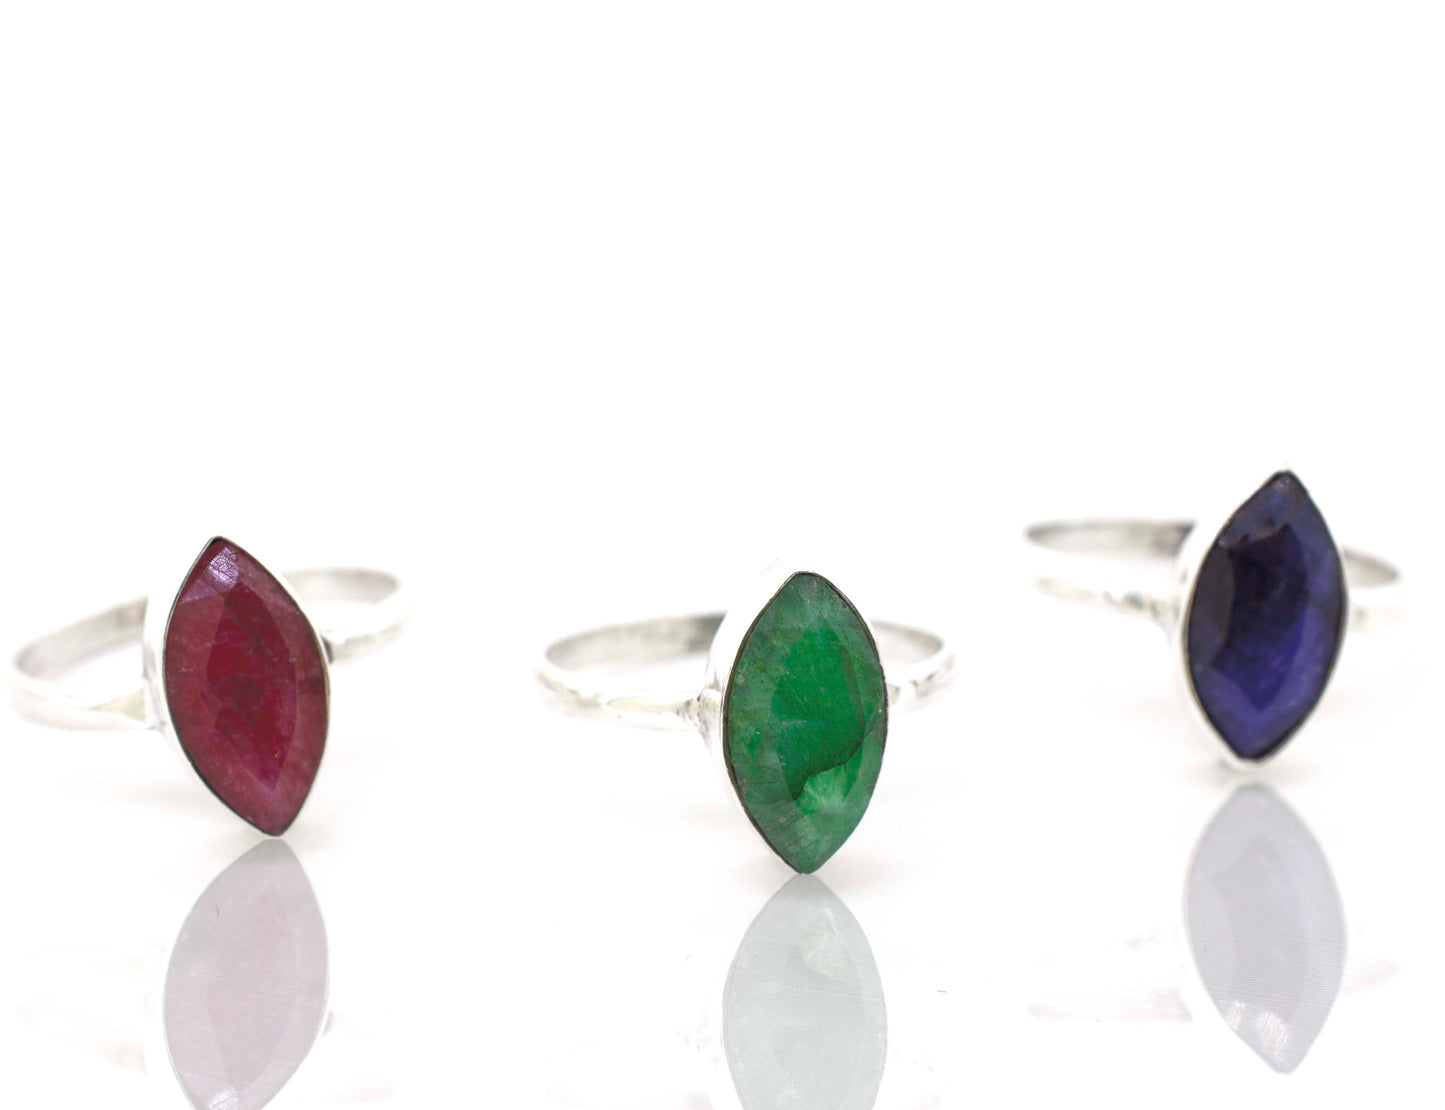 Three Simple Marquise Shaped Gemstone Rings with cabochon stones on a white surface.